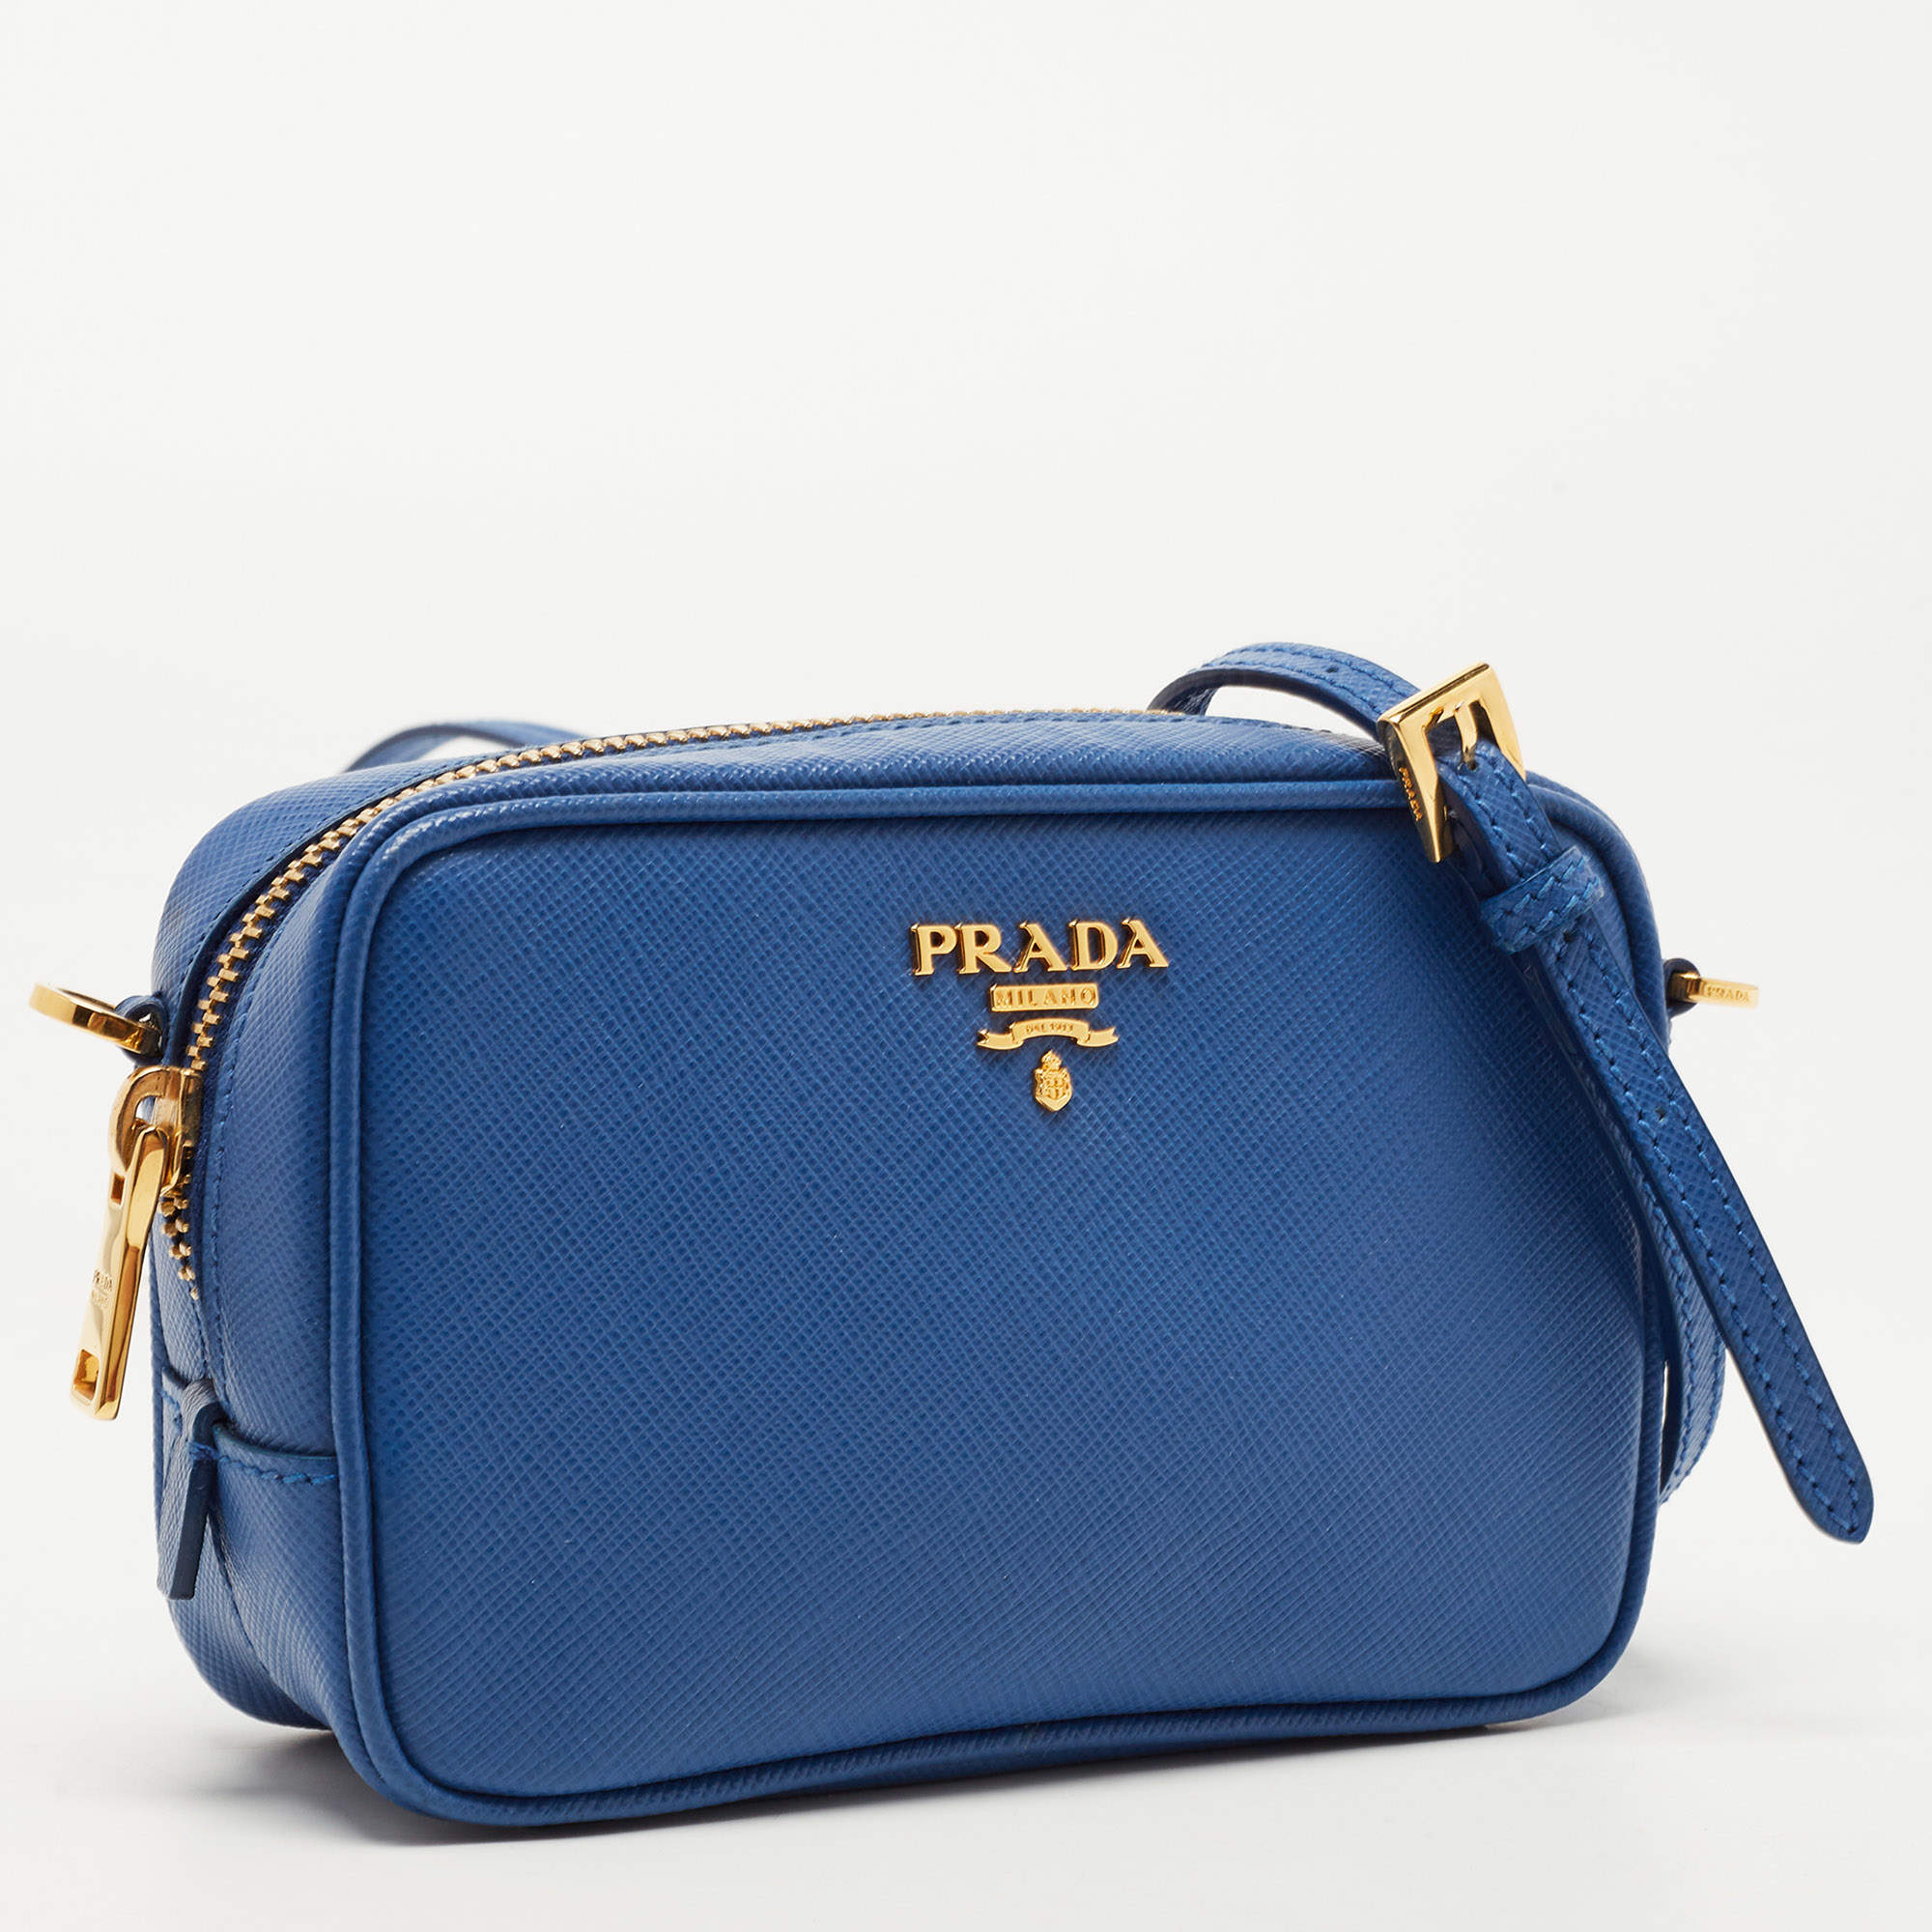 Prada – The Brand Collector | the responsible luxury